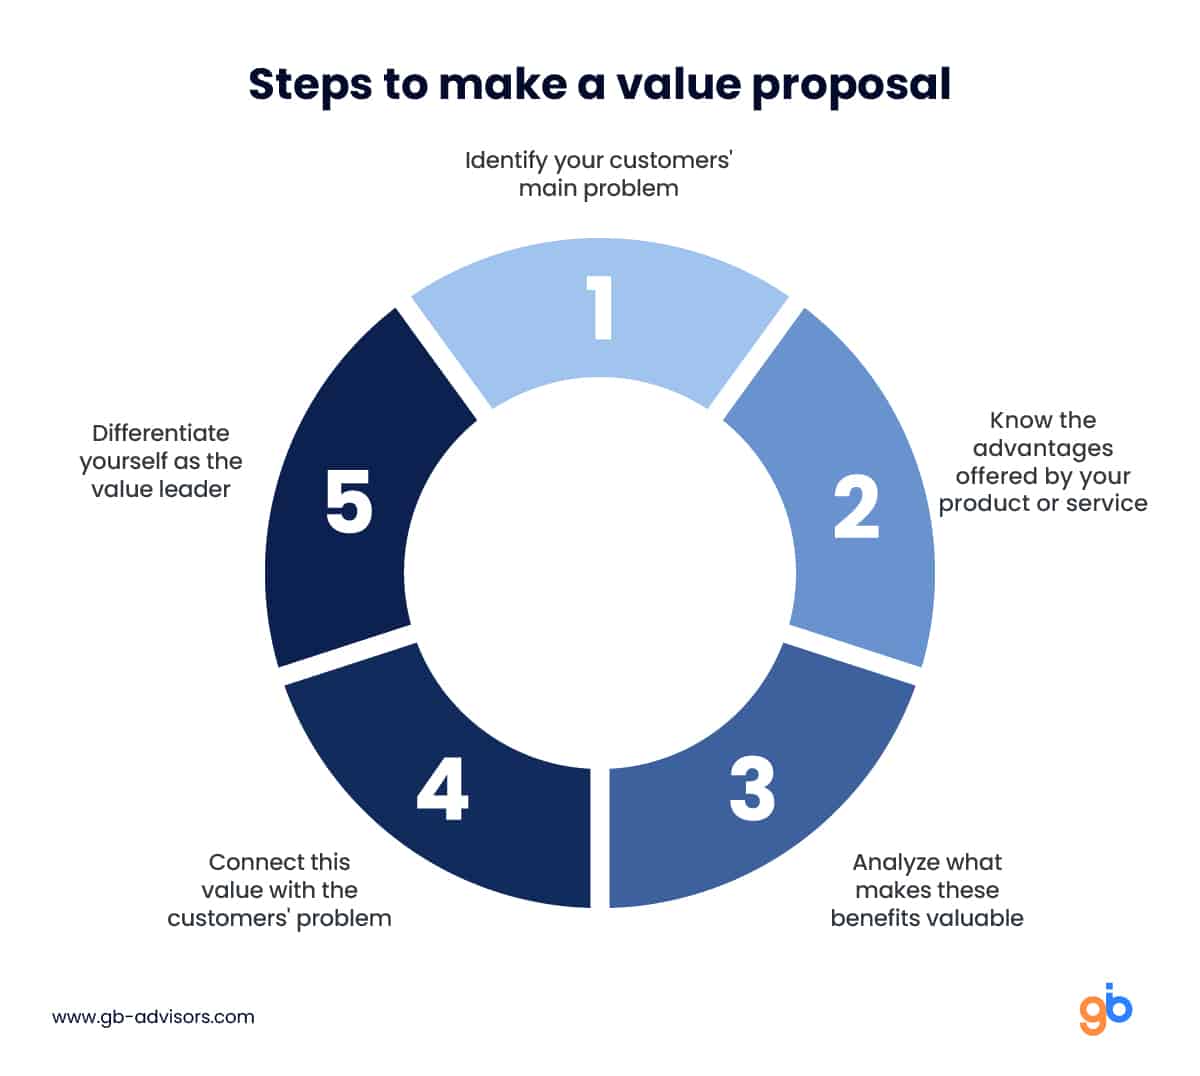 Steps to make a value proposal